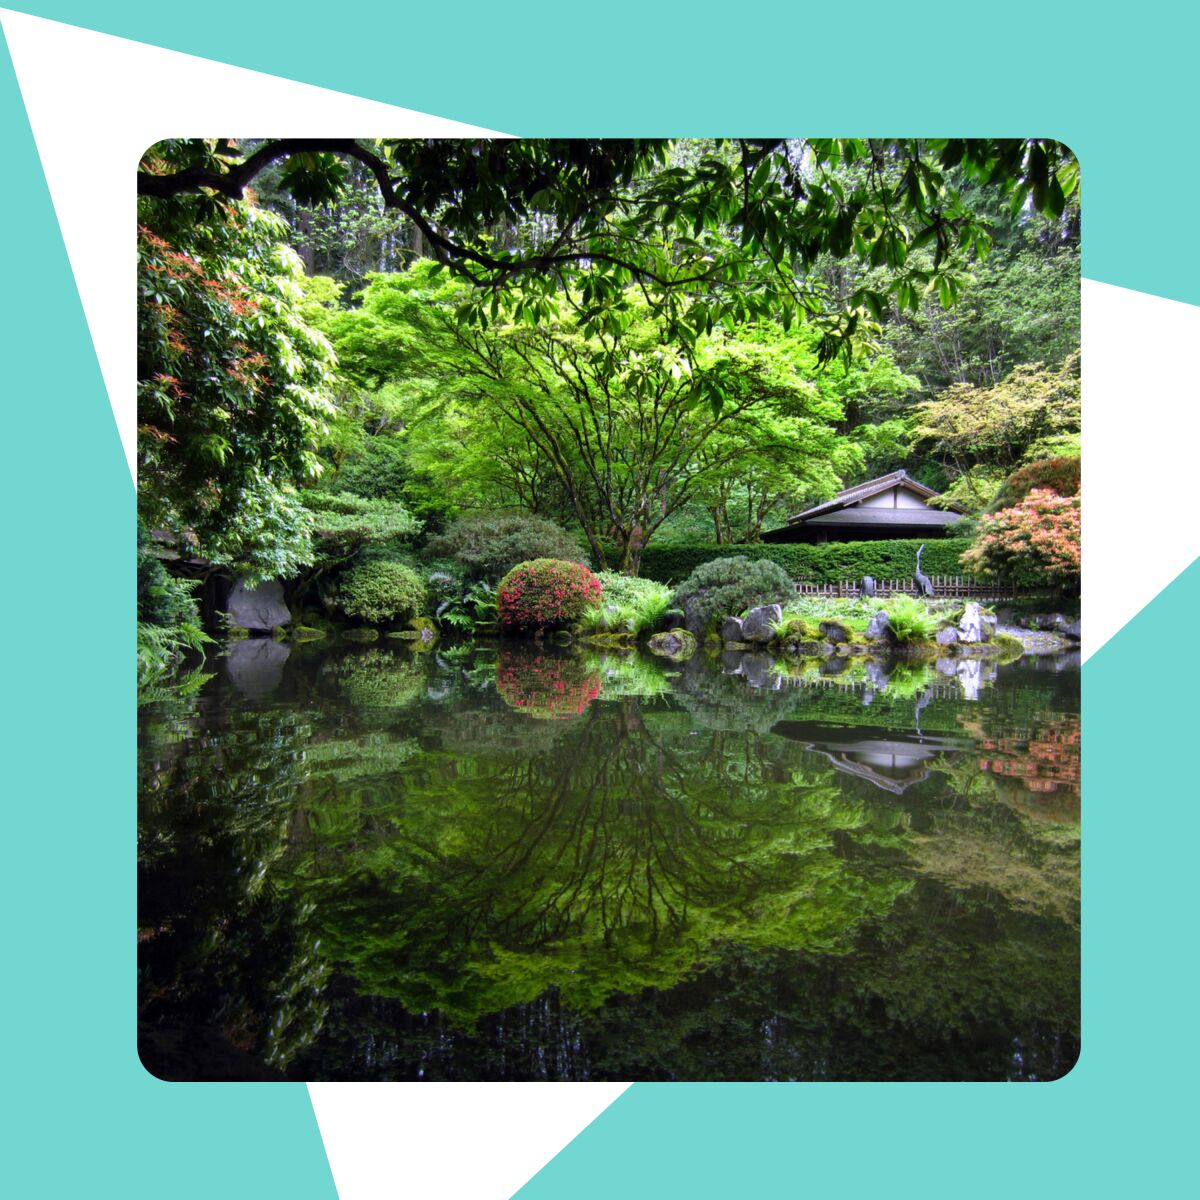 a photo of a pond in a Japanese garden on a blue and white background